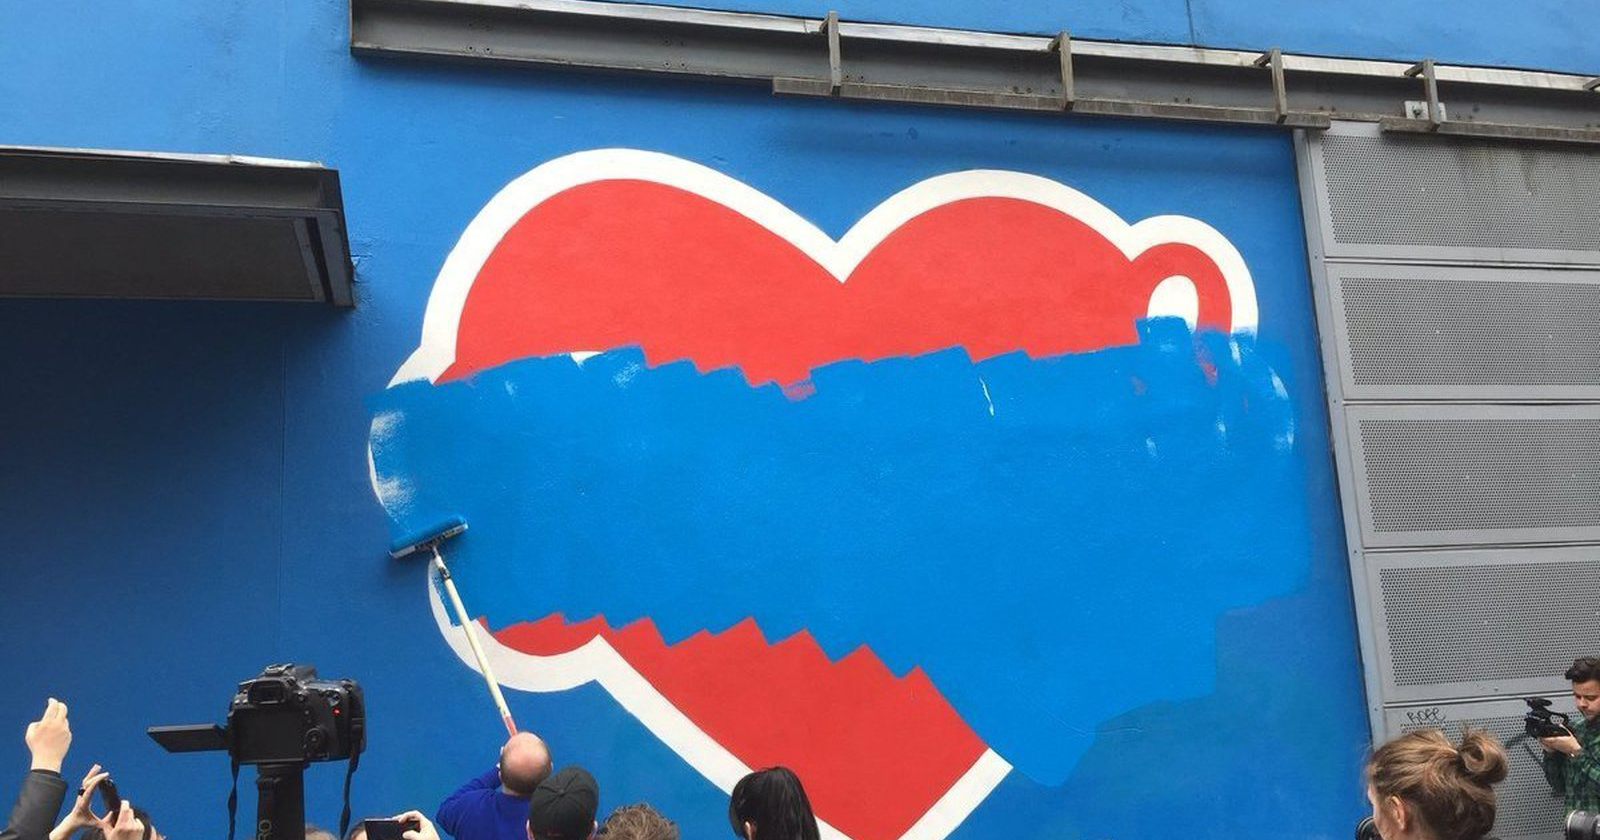 The Repeal mural in Temple Bar being painted over under orders from the Charities Regulator